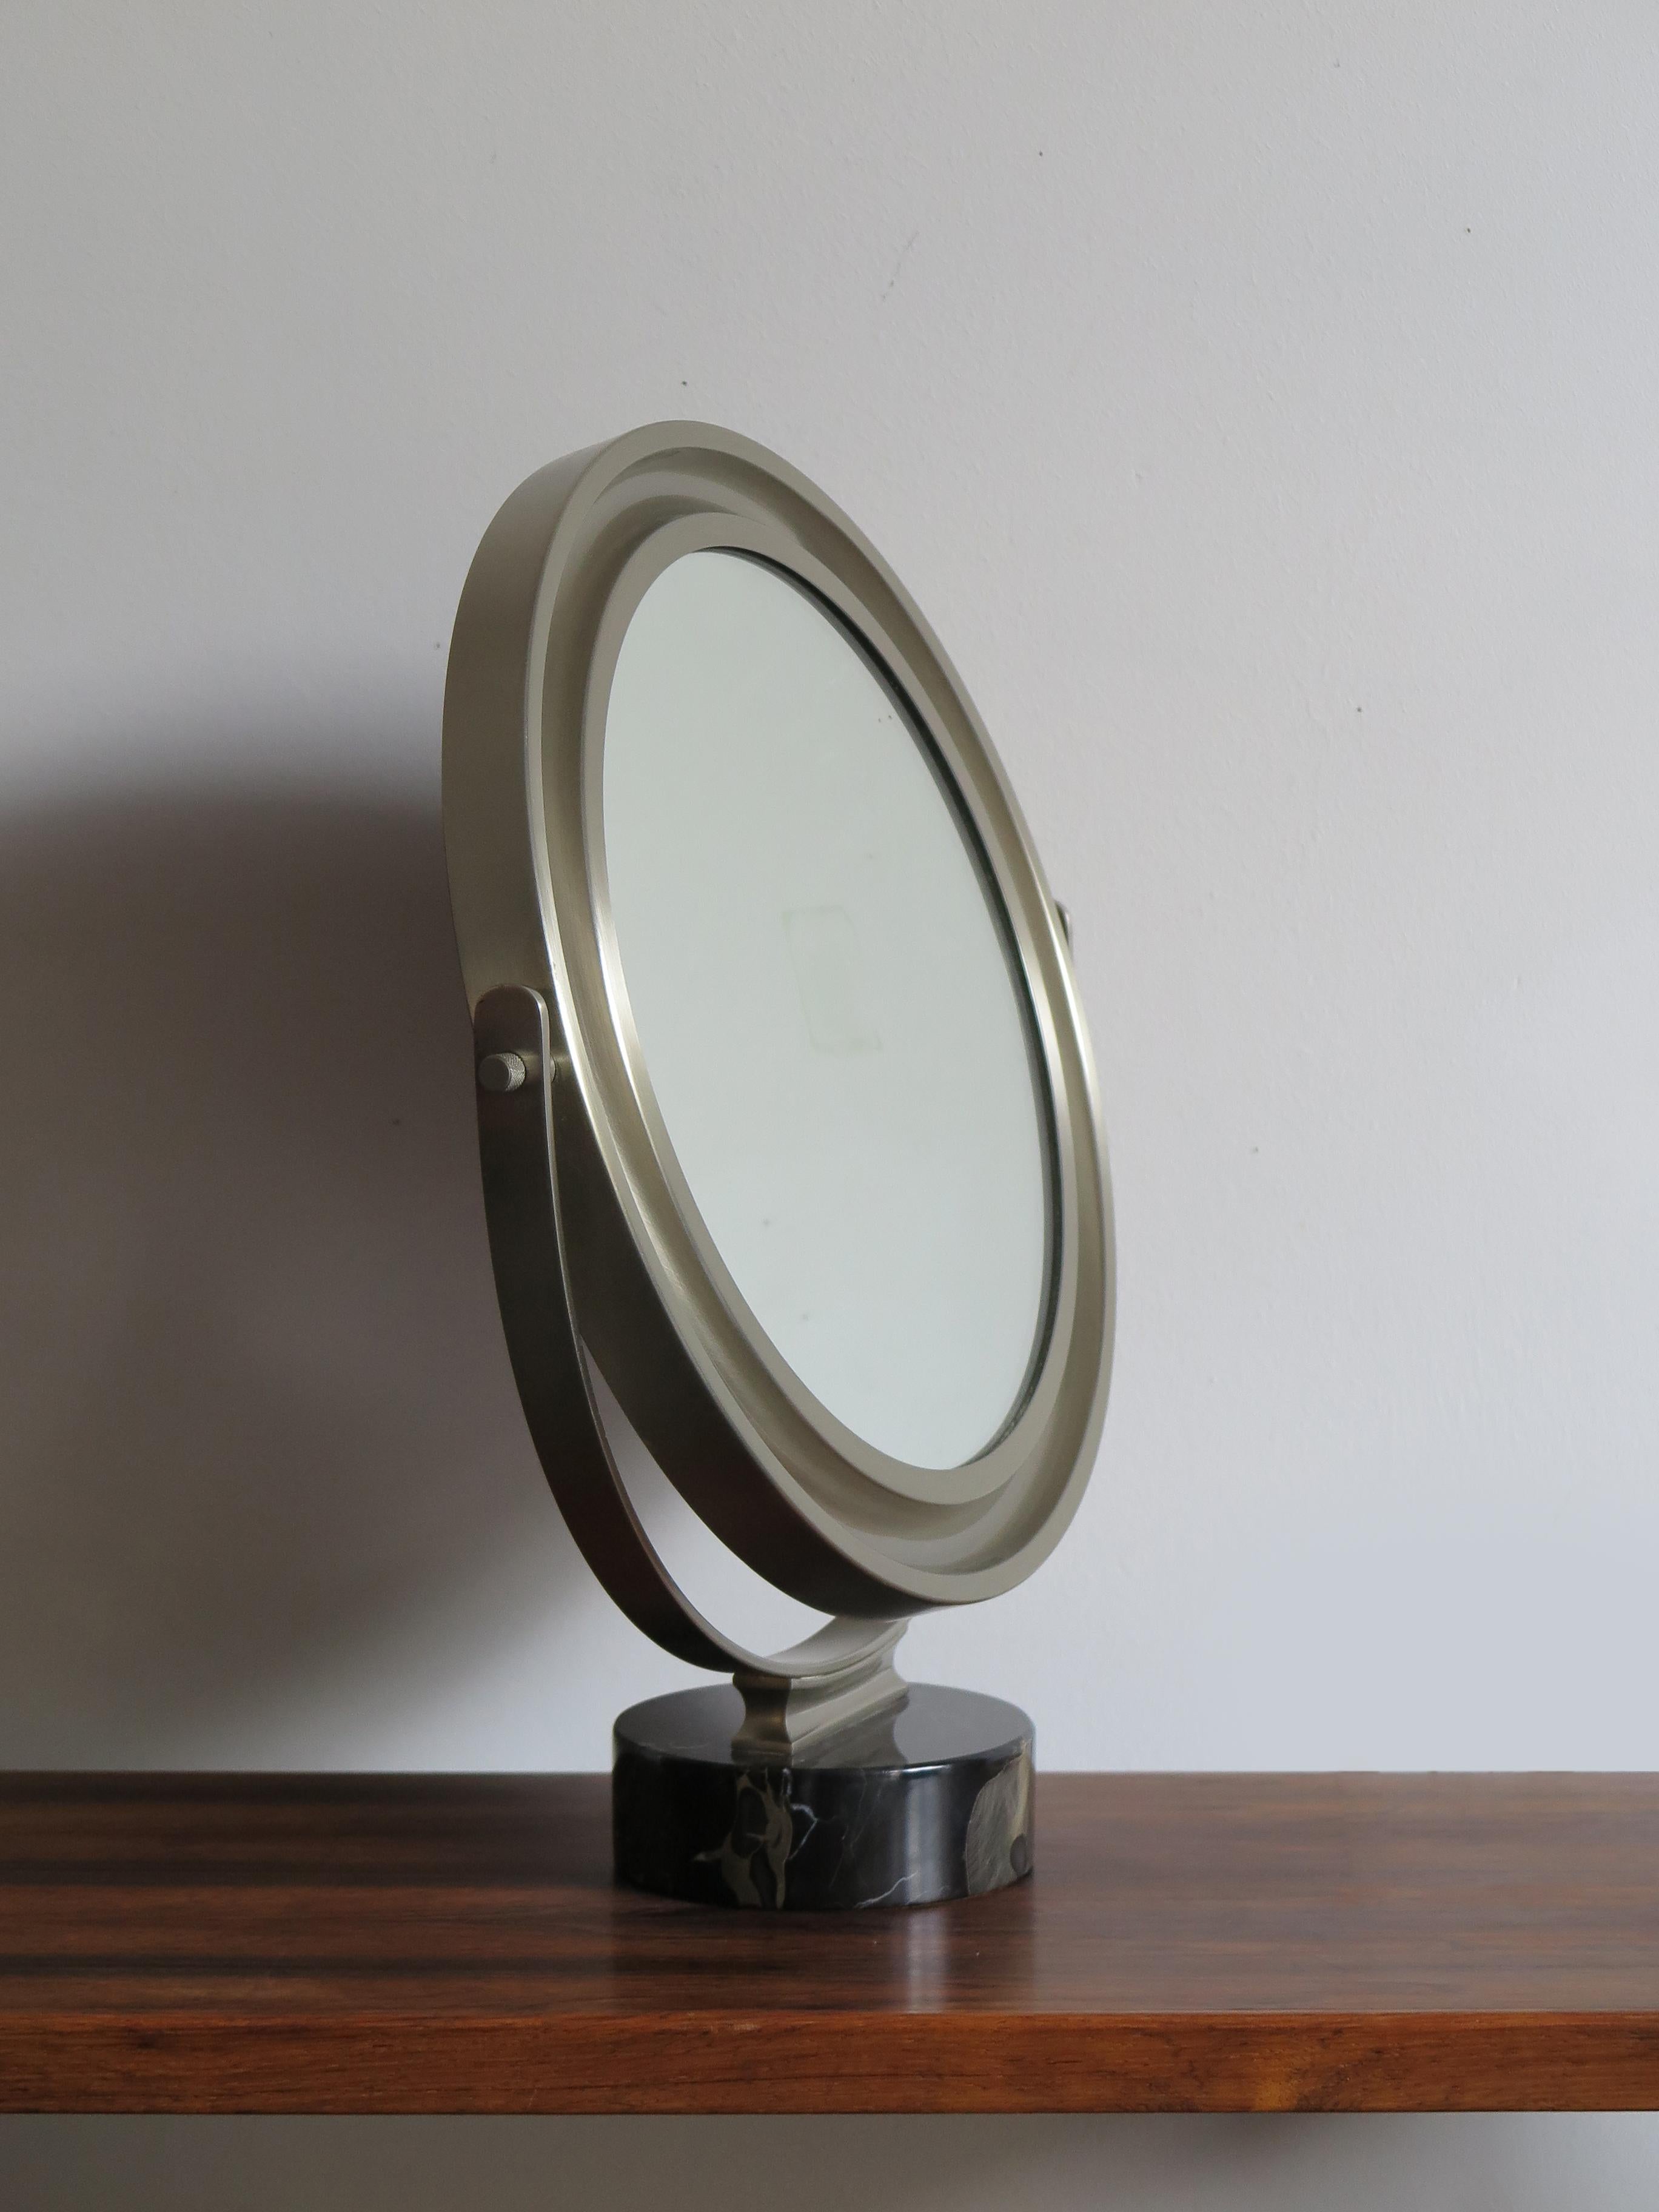 Italian Mid-Century Modern table mirror model Narciso designed by Sergio Mazza for Artemide with marble base, 1960s.

Please note that the item is original of the period and this shows normal signs of age and use.